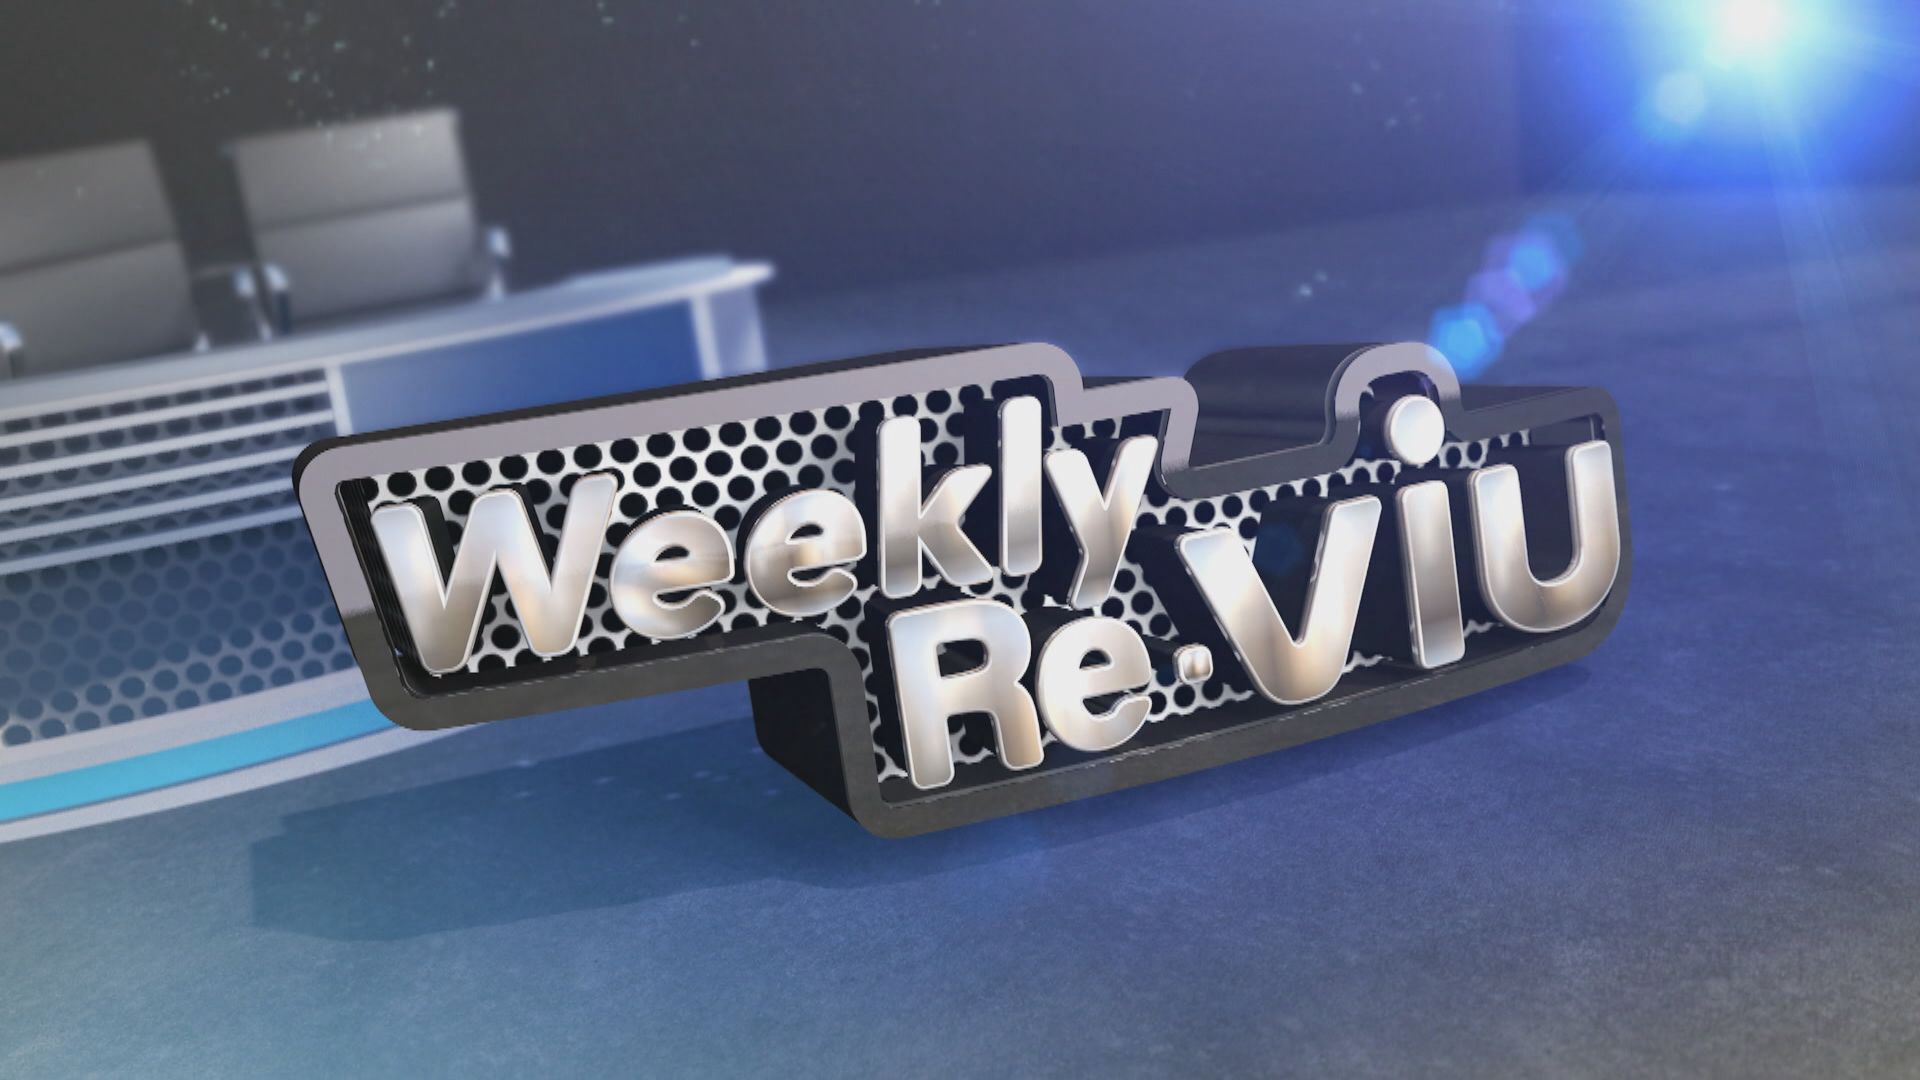 Weekly ReViu | Part Two - Story Roundup (27.8.2022)